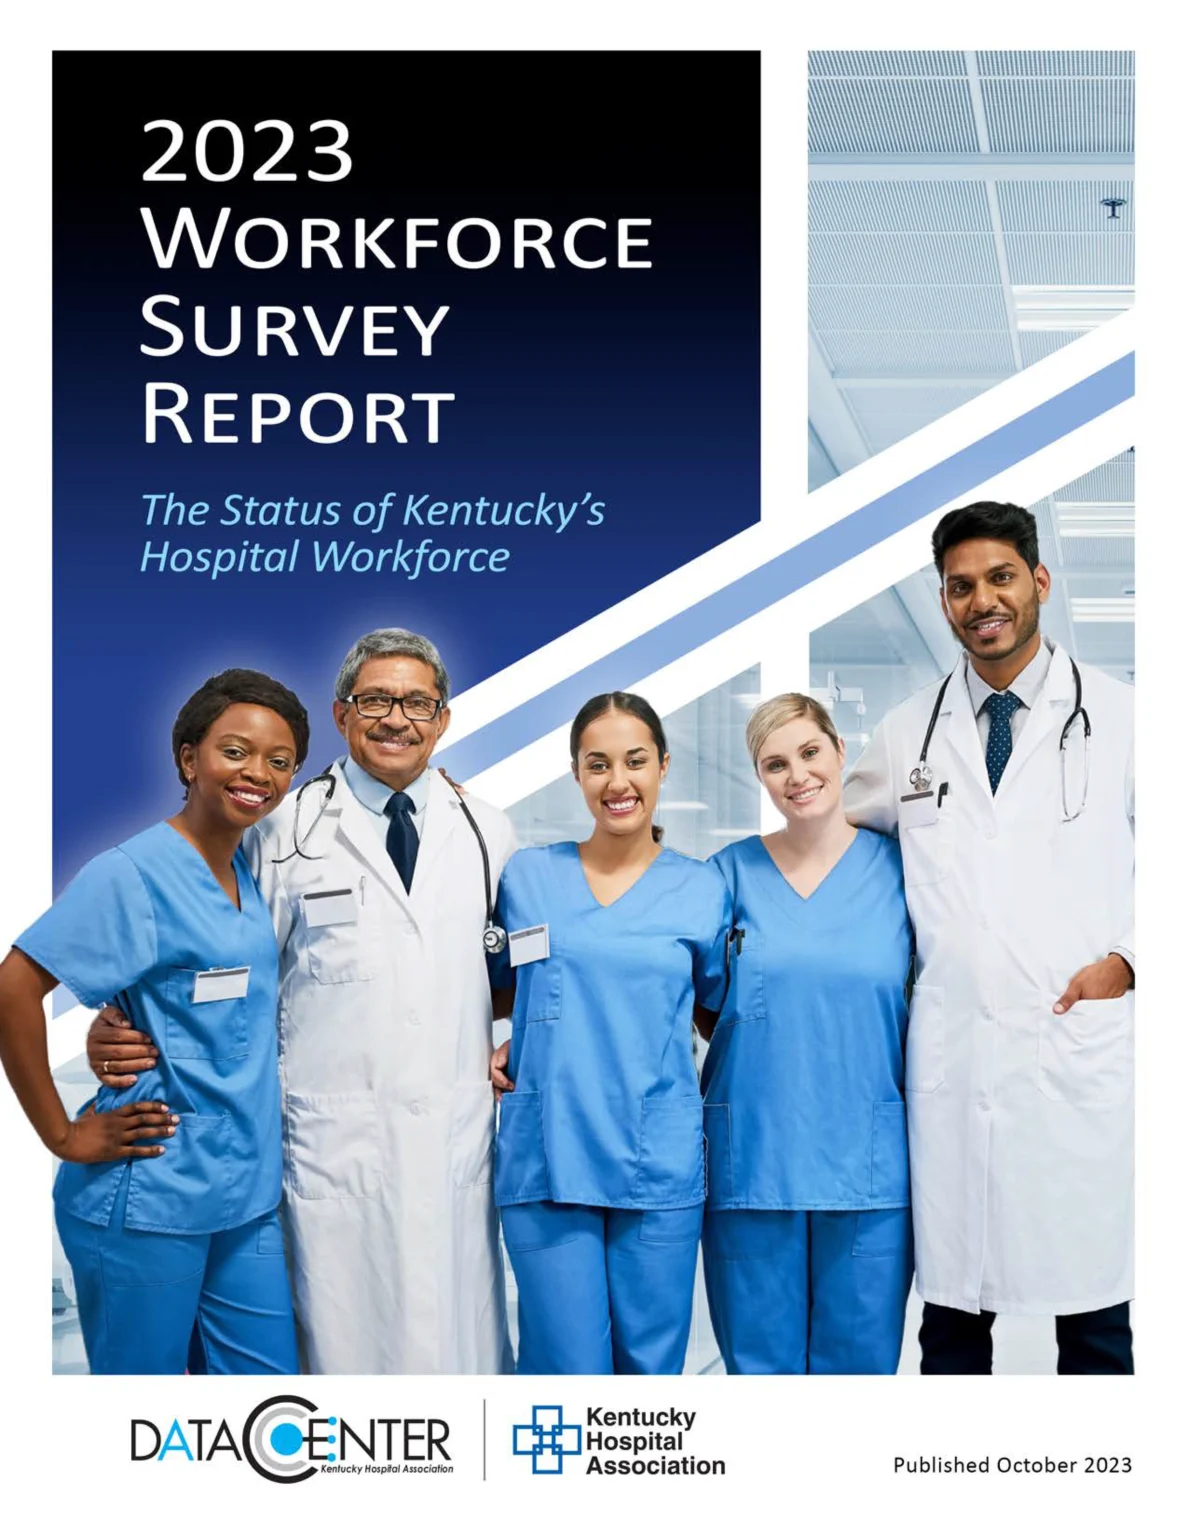 2023 Workforce Survey Report cover image